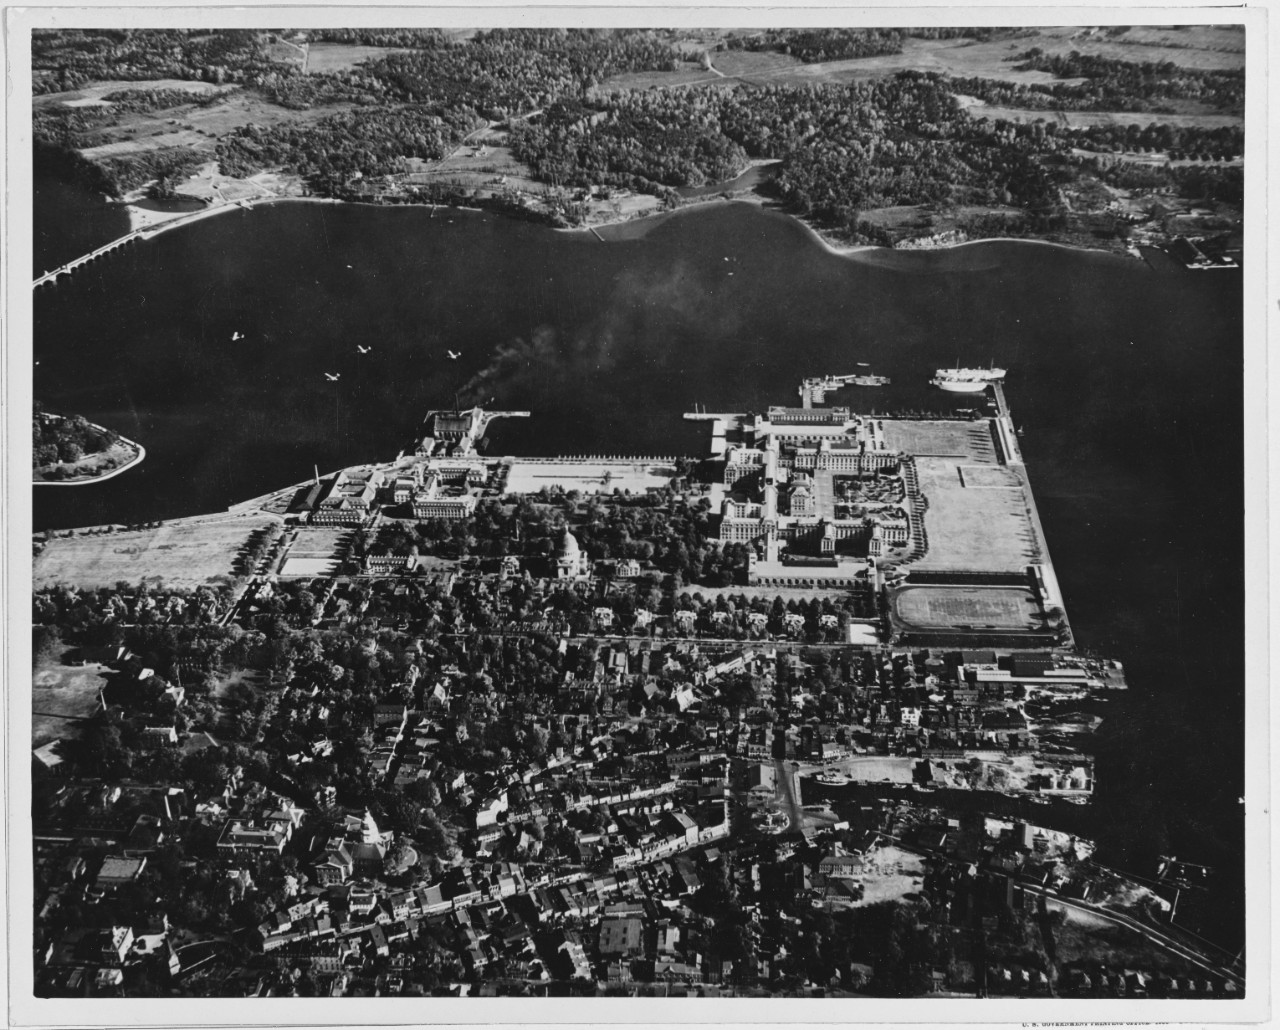 Aerial view of Naval Academy in Annapolis, Maryland from USS AKRON, August 8, 1931